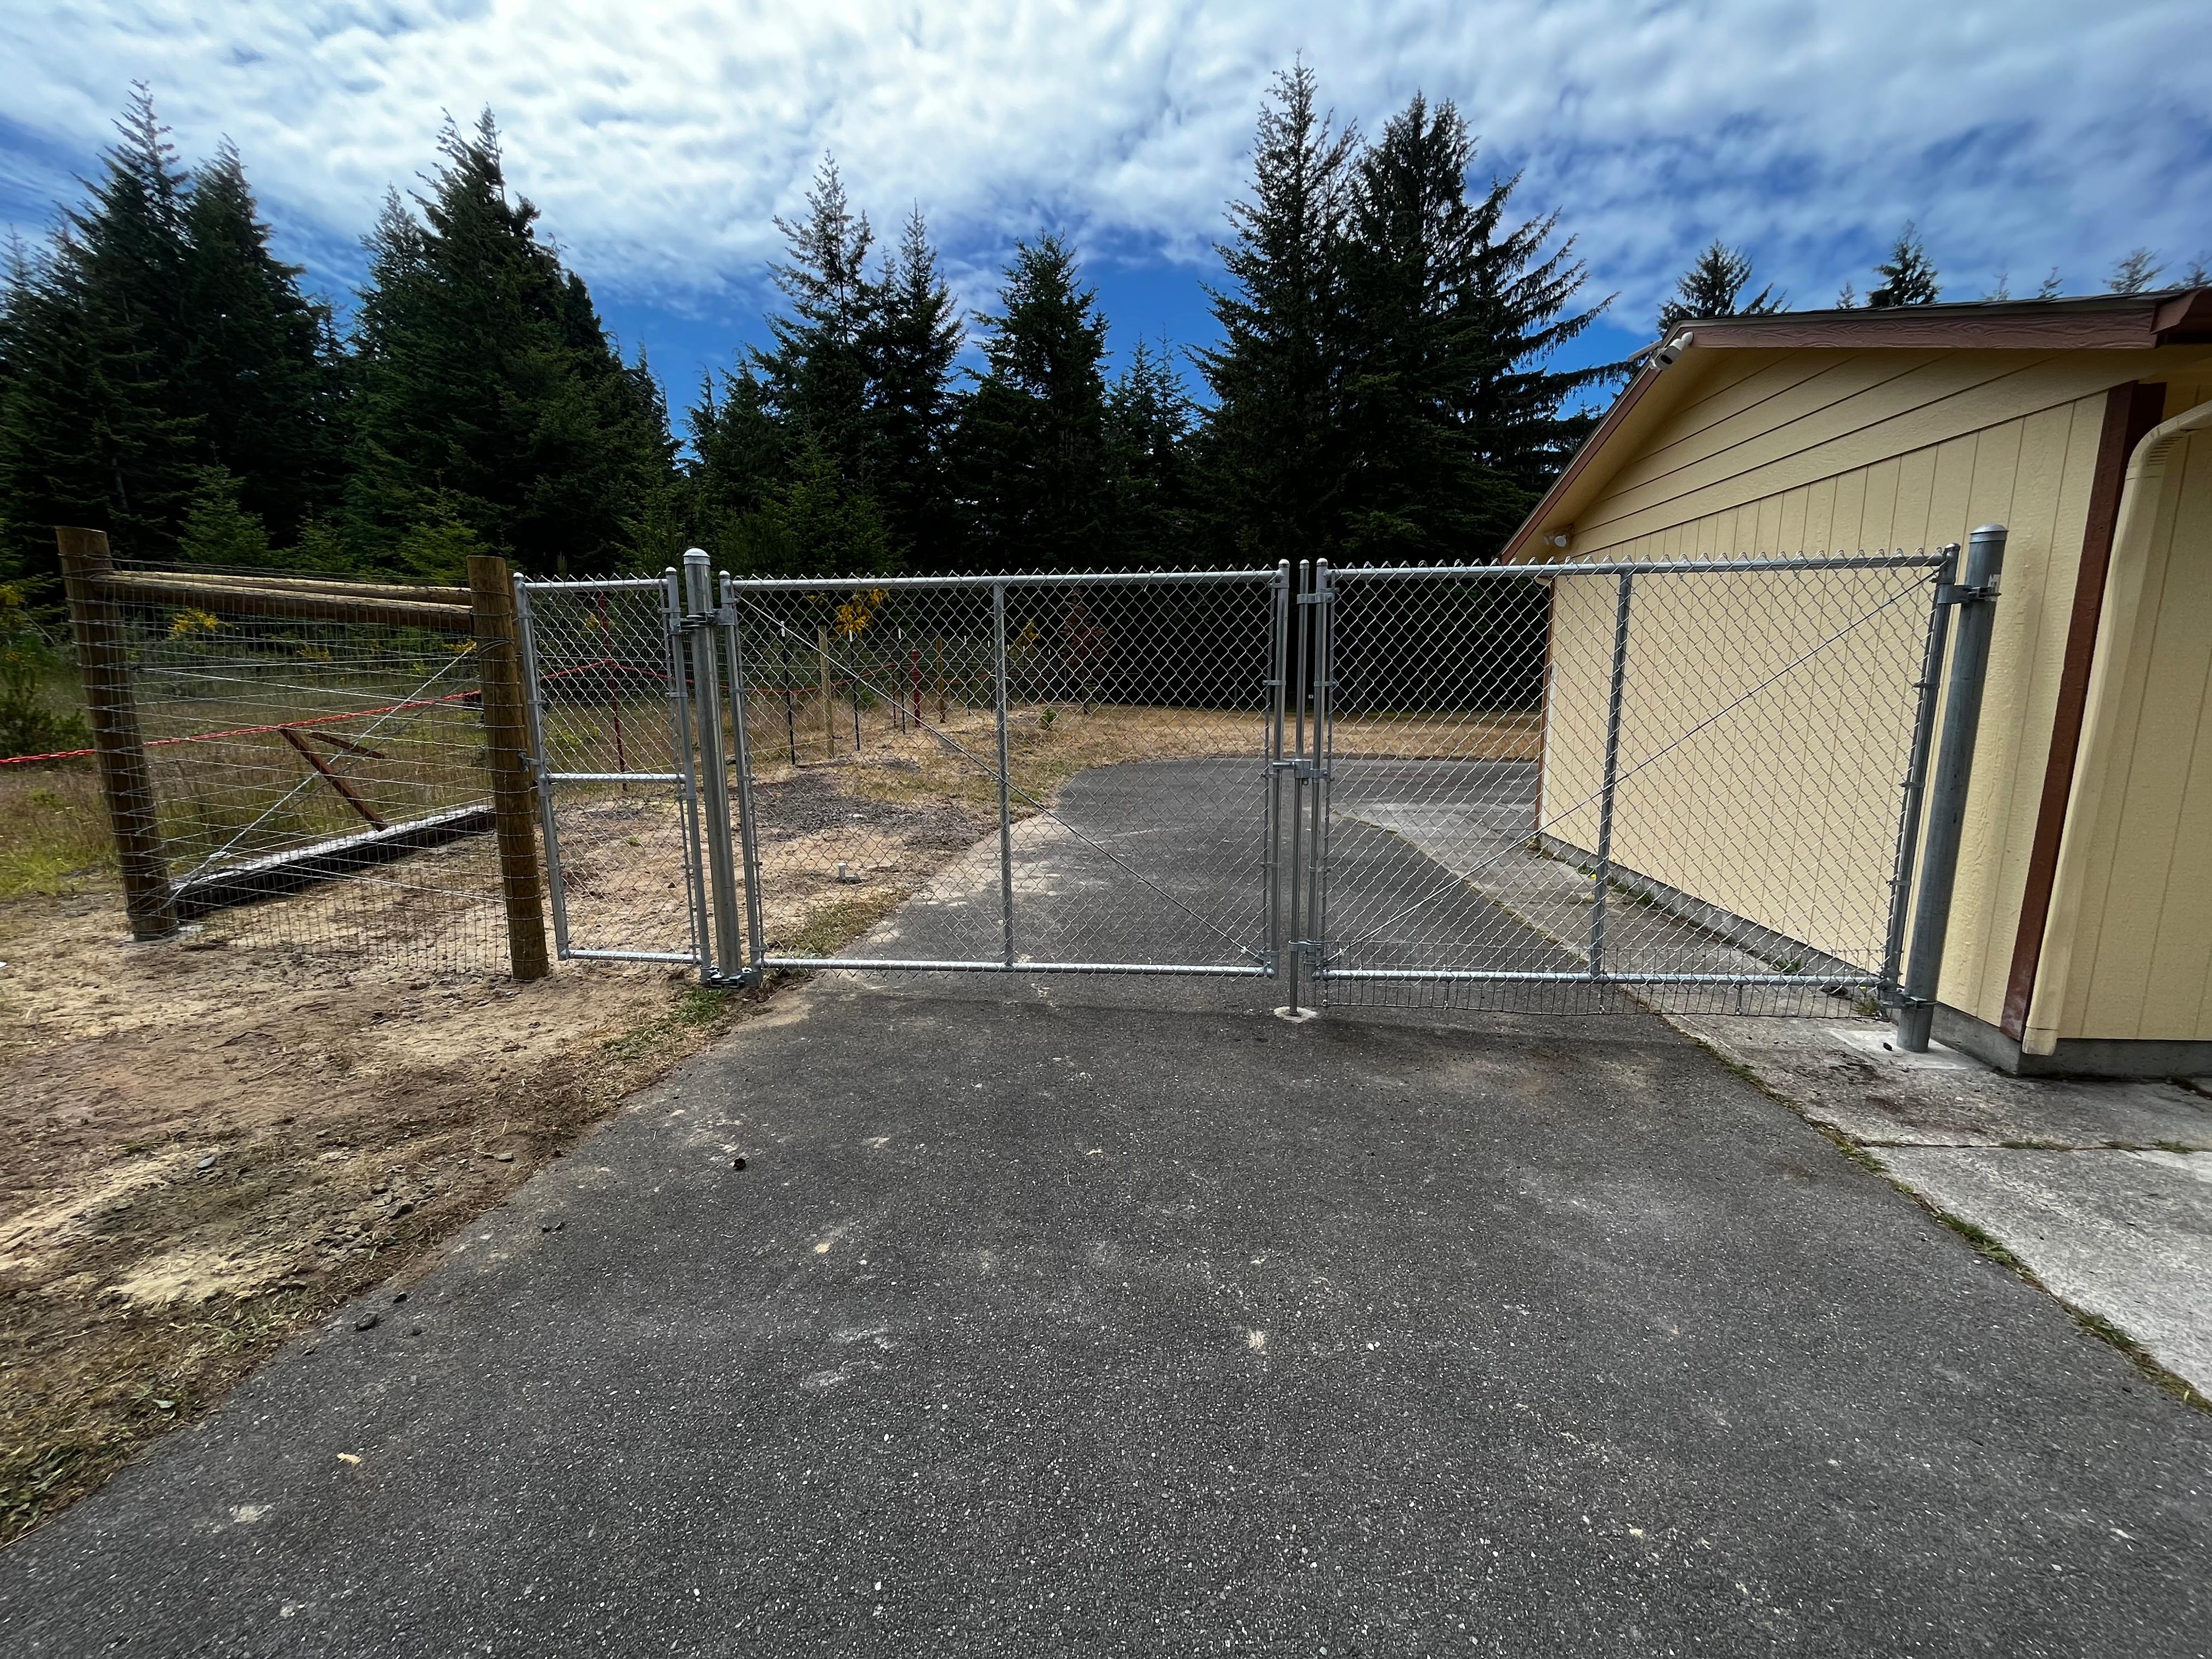 With a wealth of experience in the fencing industry, our team at Cleveland Fencing and Contracting, LLC has been serving the Coos Bay community for many years. To learn more, contact our team of experts today and schedule your appointment!